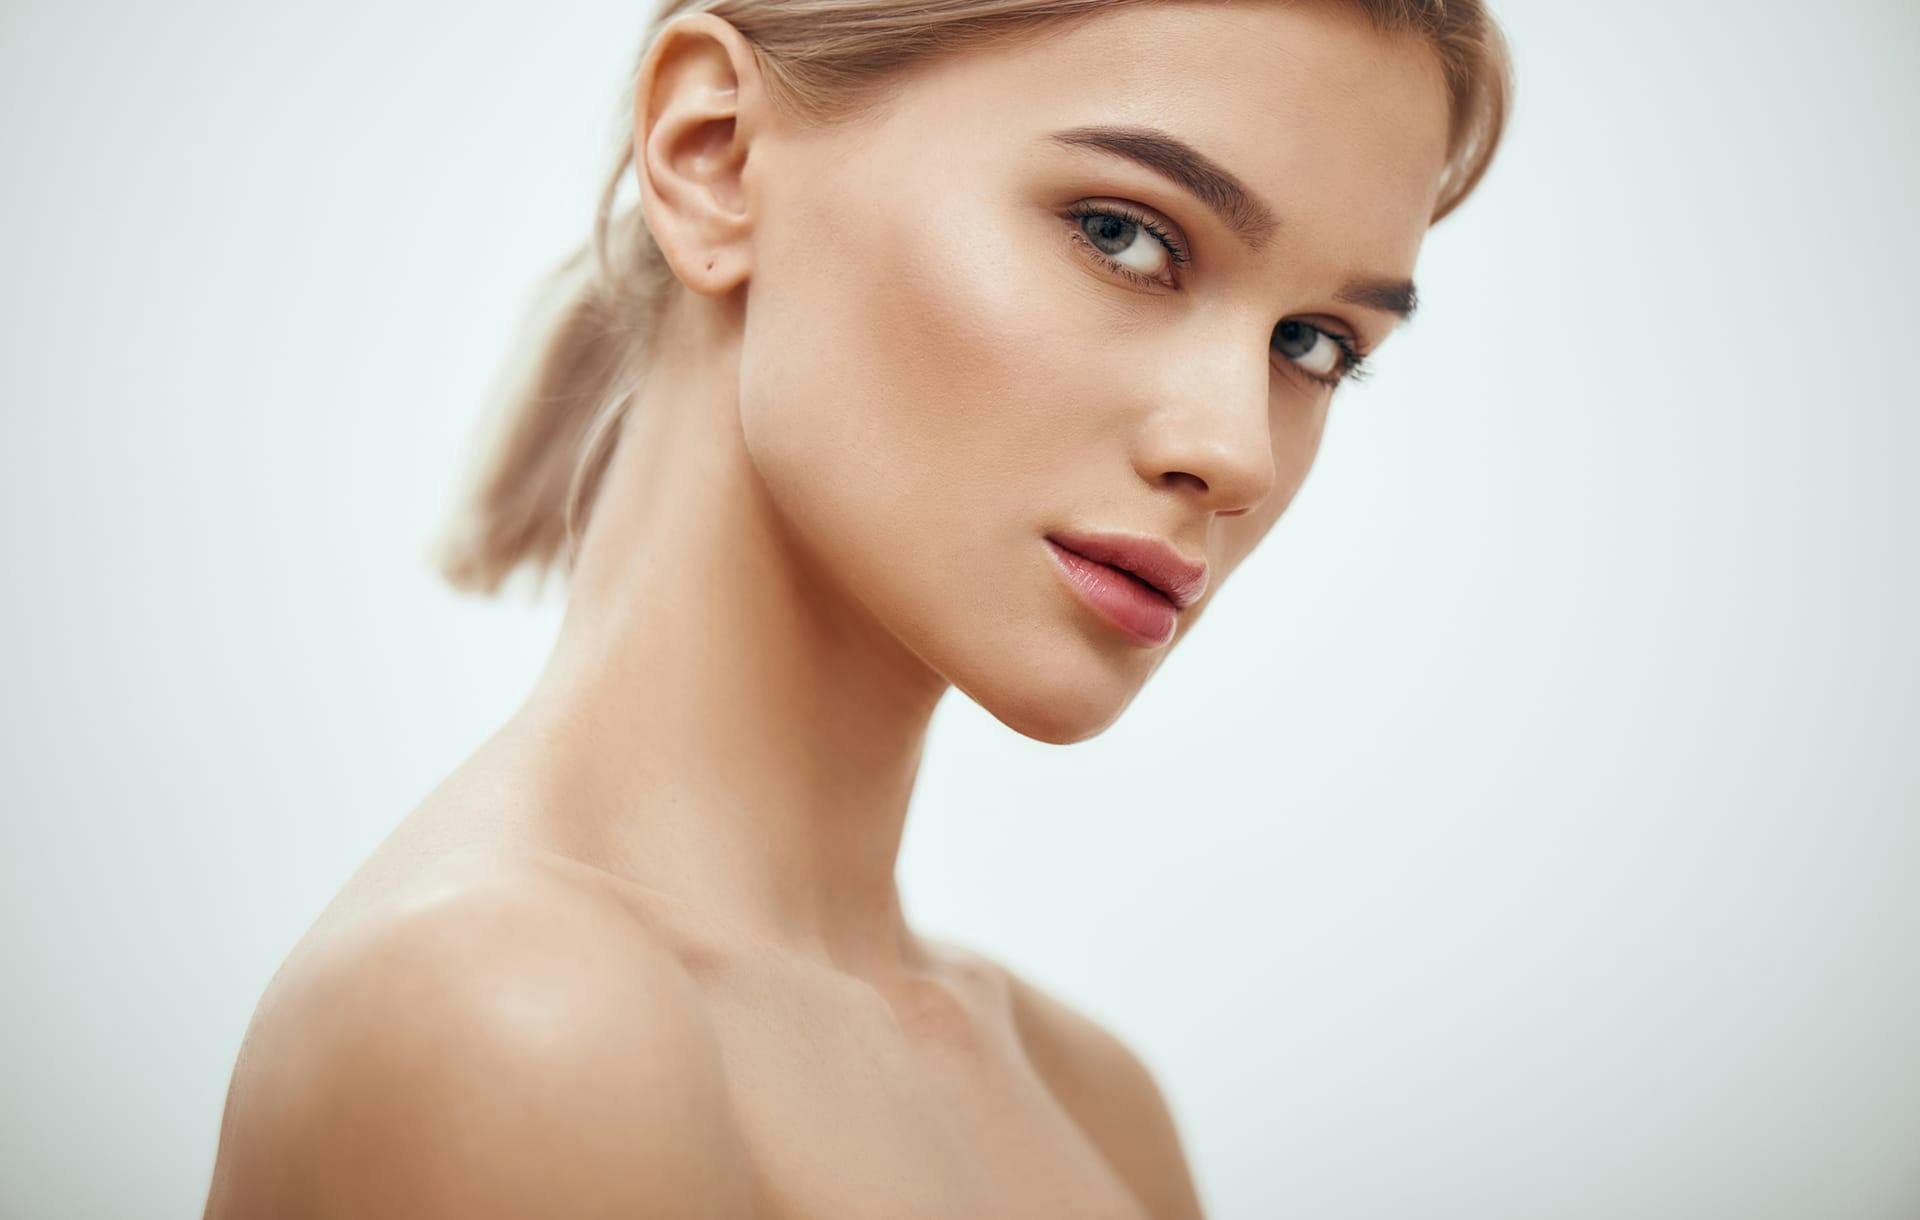 woman with short blonde hair